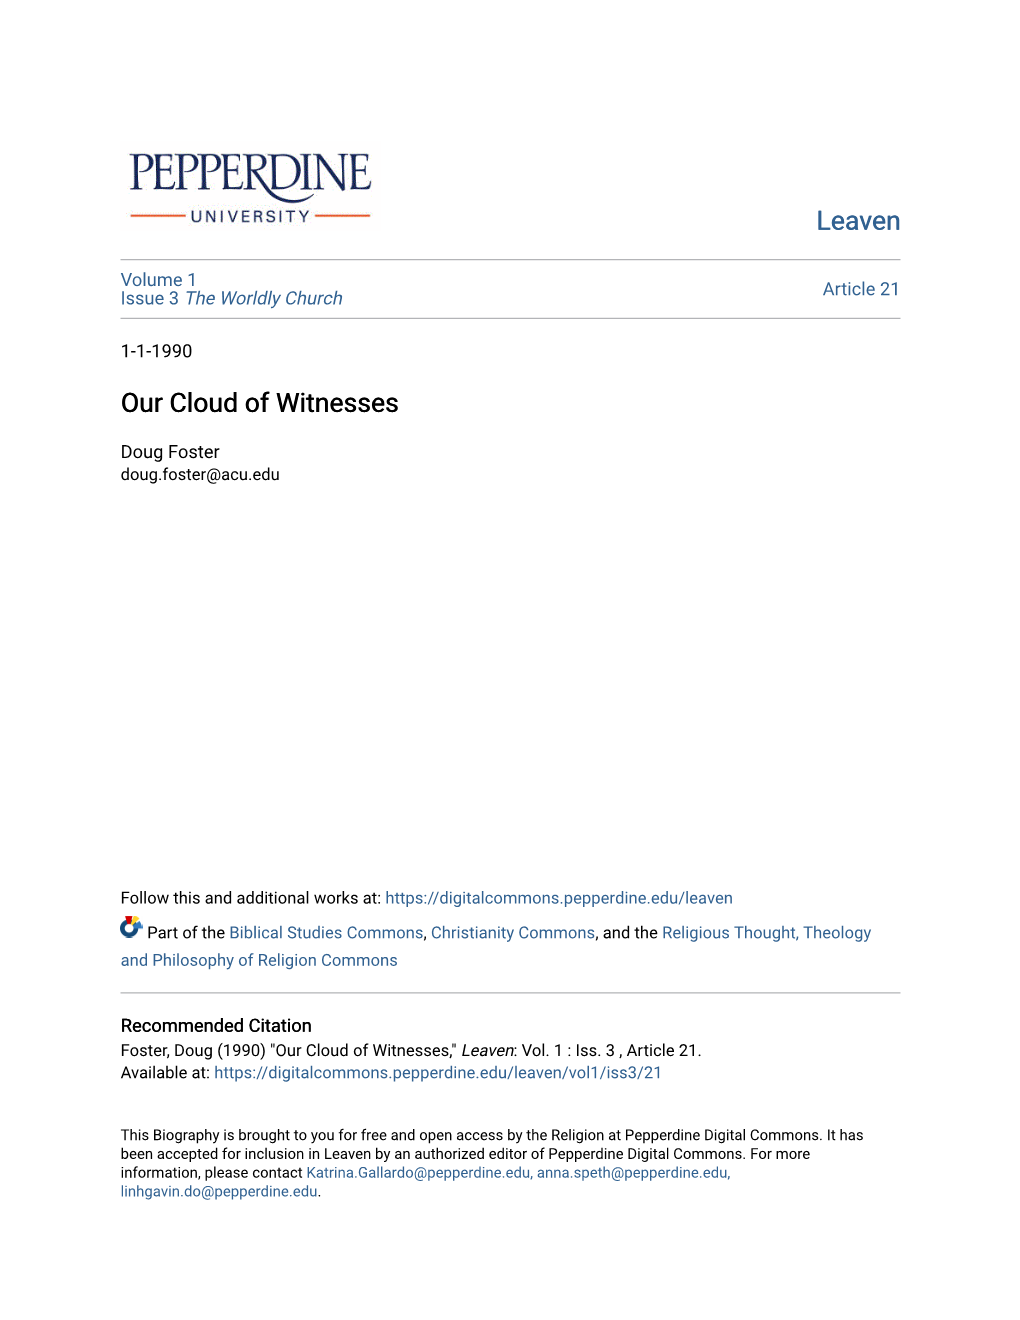 Our Cloud of Witnesses